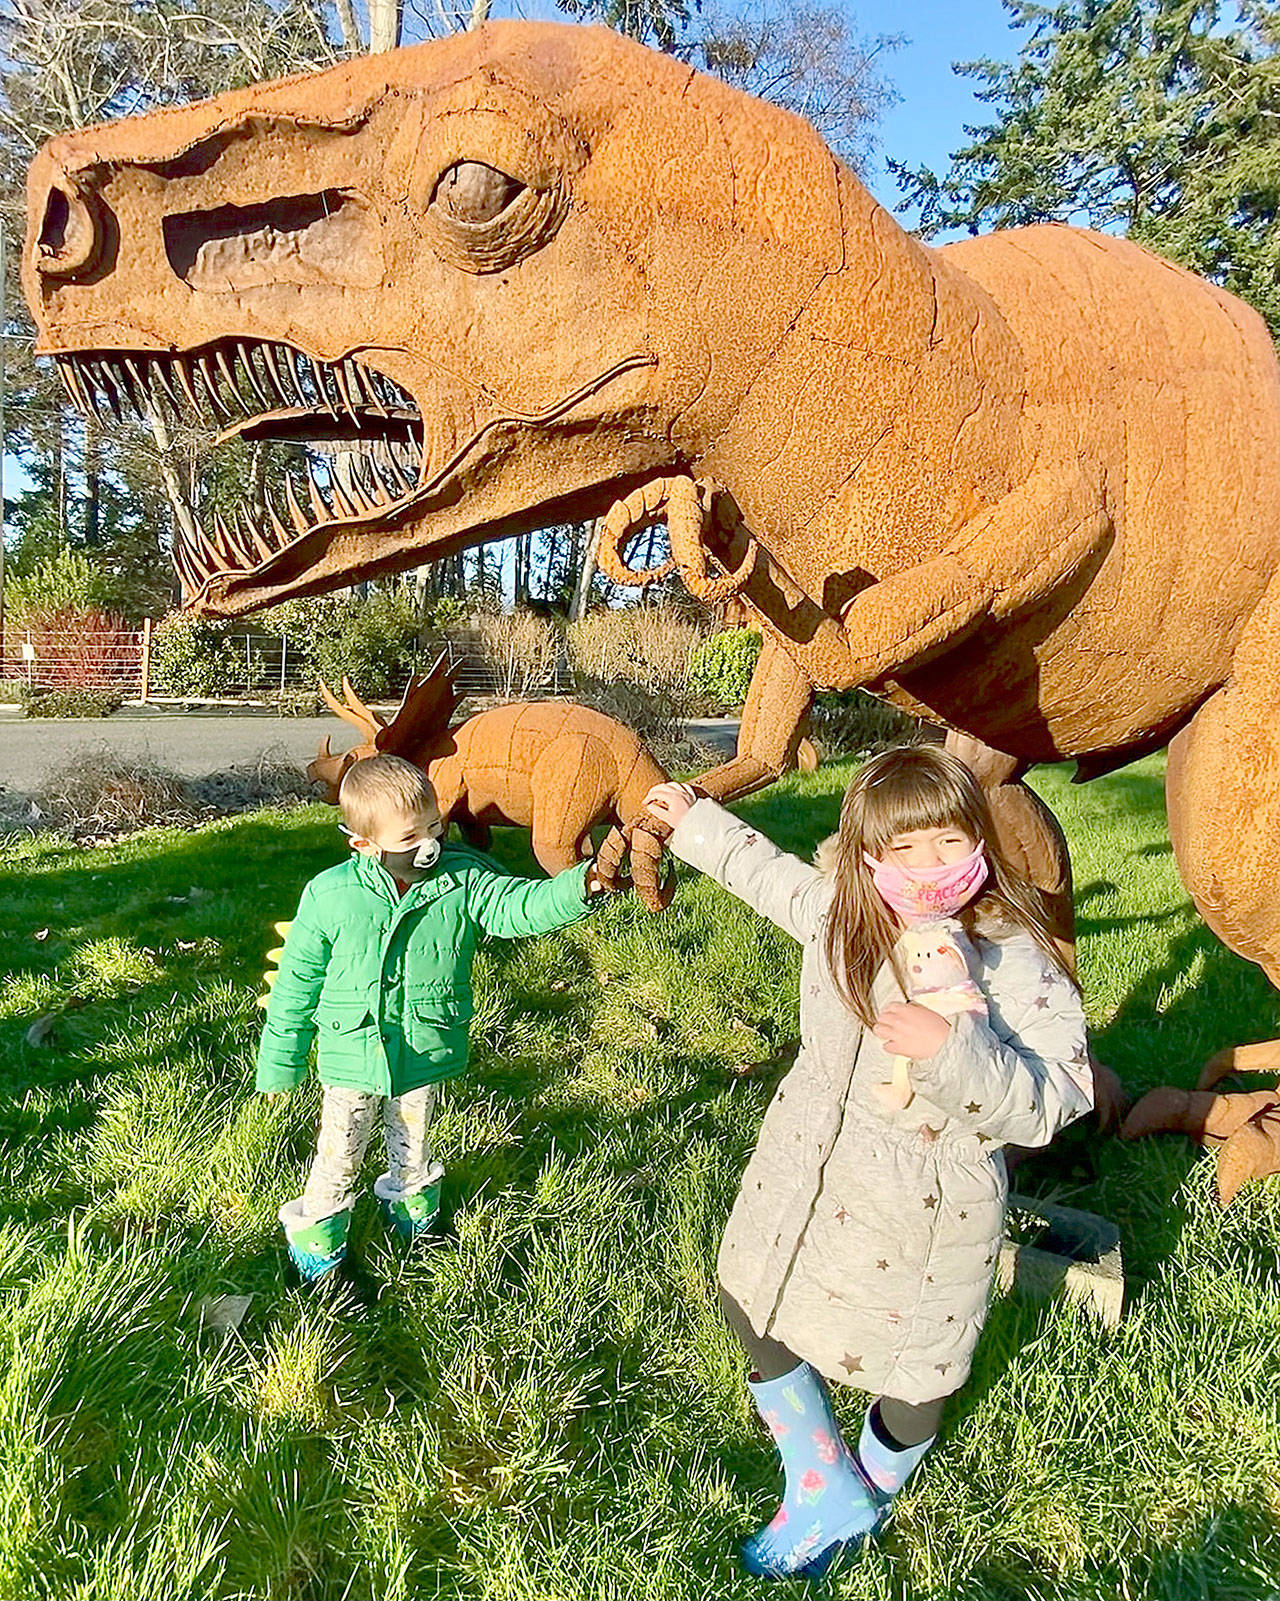 At left, Leo Zucca, 4, of Everett visits the yard of grandma Mary Saltwick in Freeland on Whidbey Island. He’s seen here with Momo Brown, 5, the reporter’s granddaughter. (Andrea Brown / The Herald)